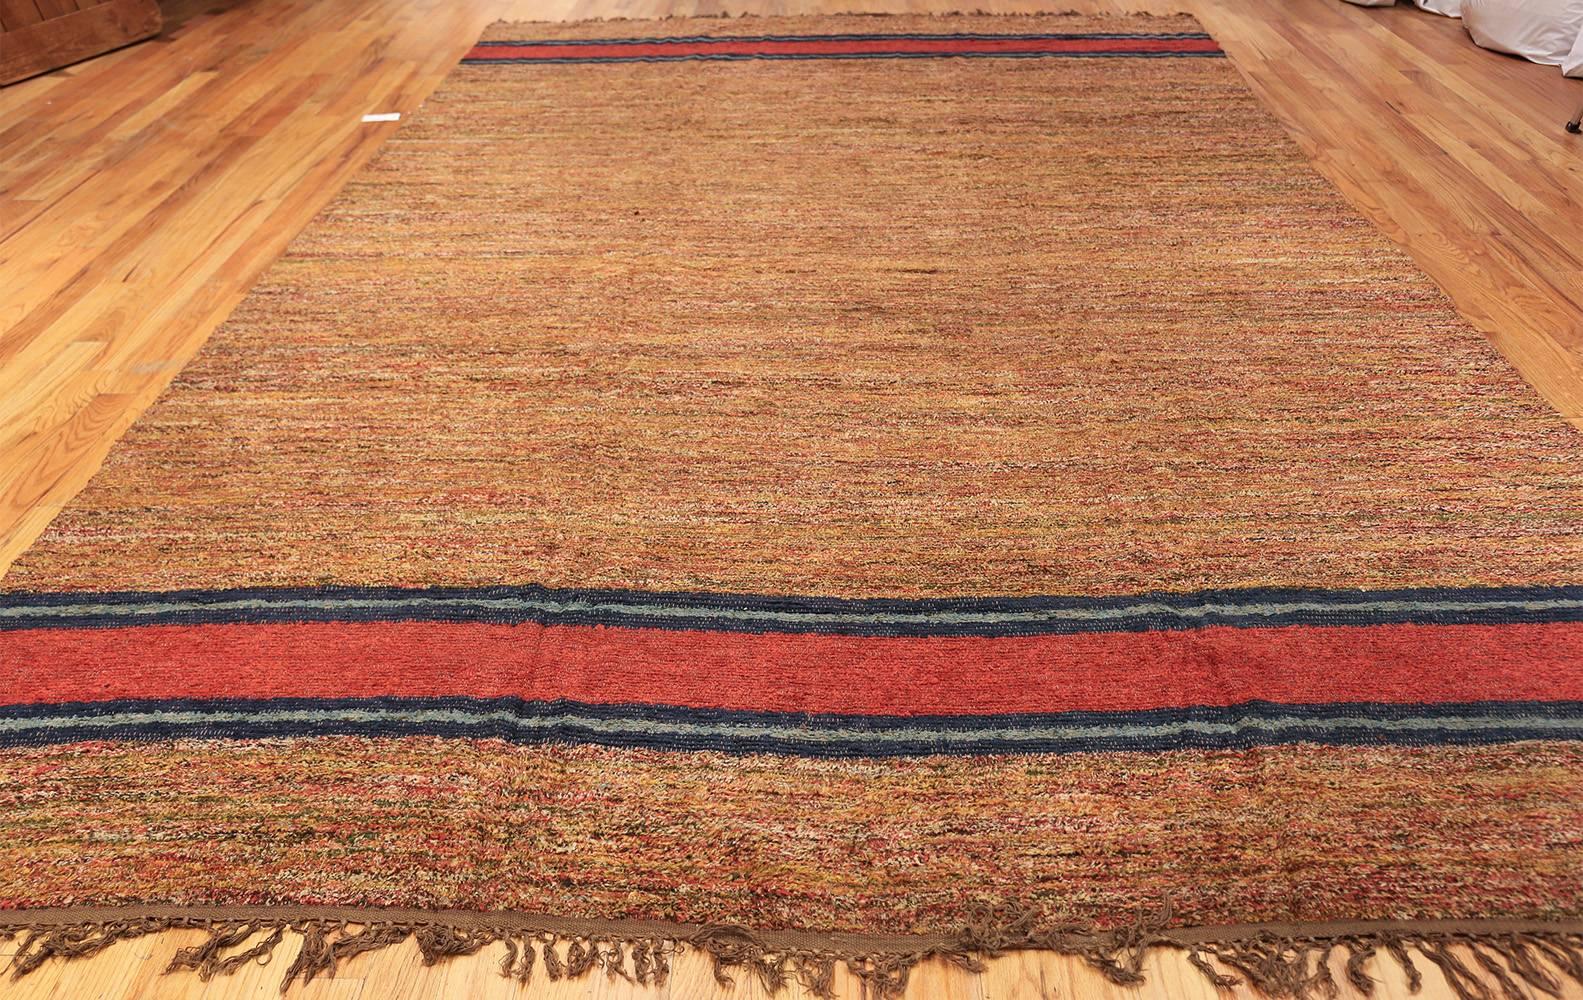 Beautiful Room Size Antique American Chenille Carpet, Country of Origin / Rug Type: American Rug, Circa Date: 1870 – Size: 8 ft 8 in x 13 ft 9 in (2.64 m x 4.19 m).